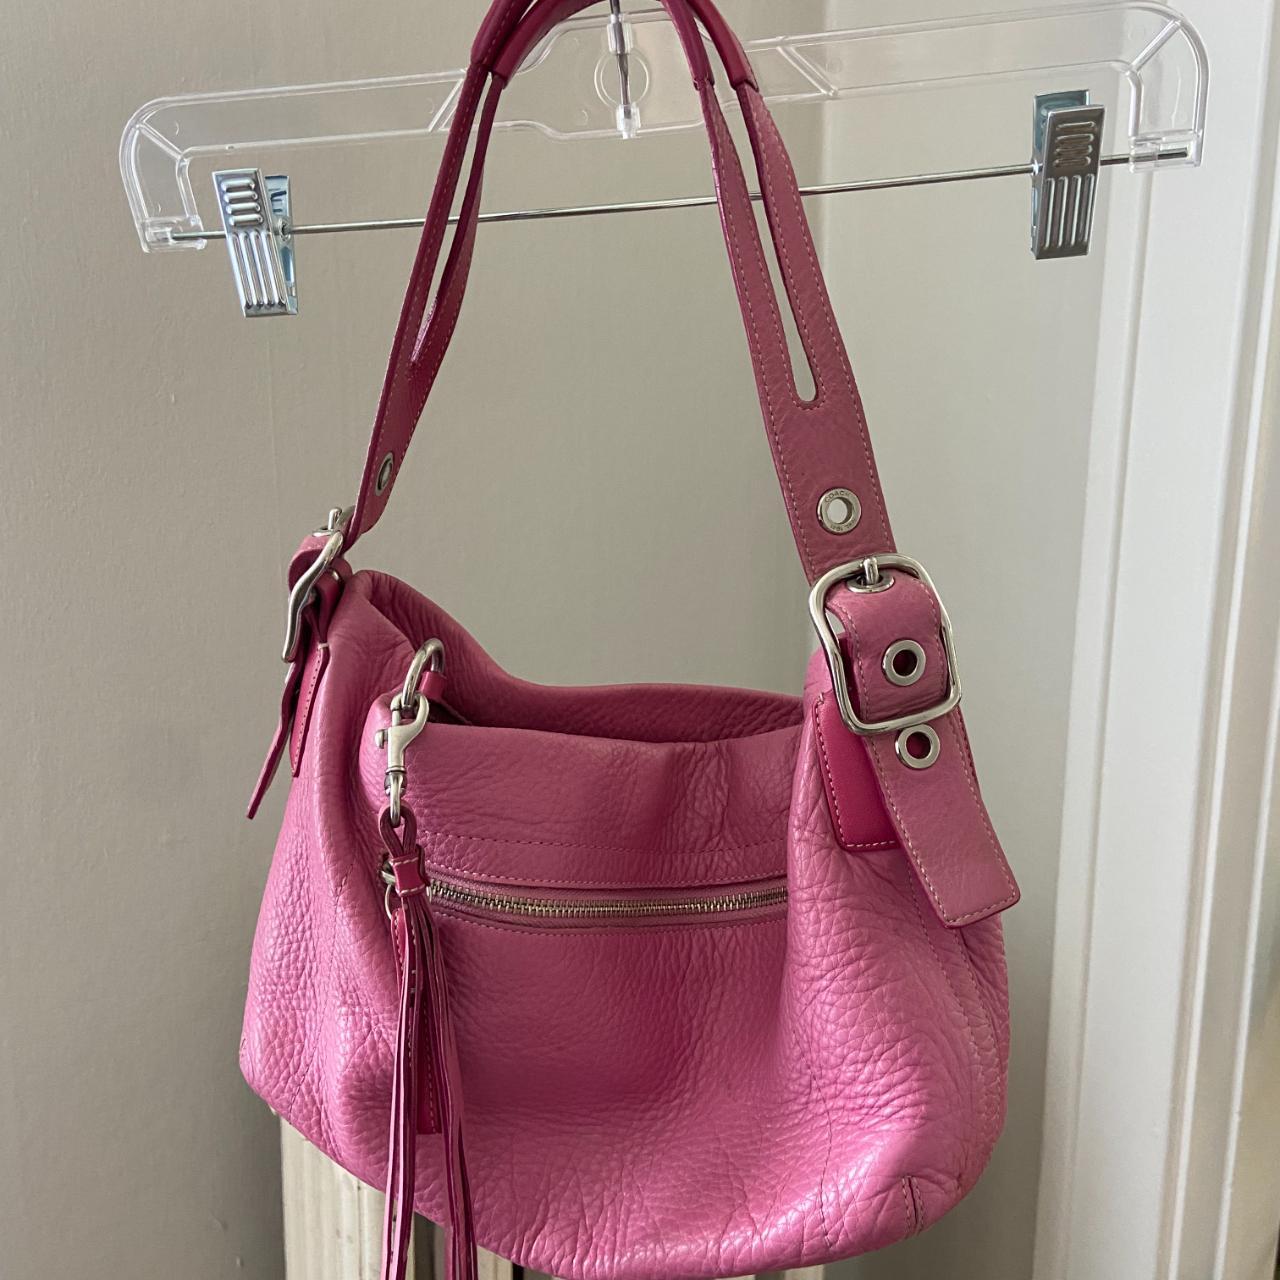 Coach Vintage Y2K Stitched C Stripe Berry Pink Patent Leather Tote Bag |  eBay